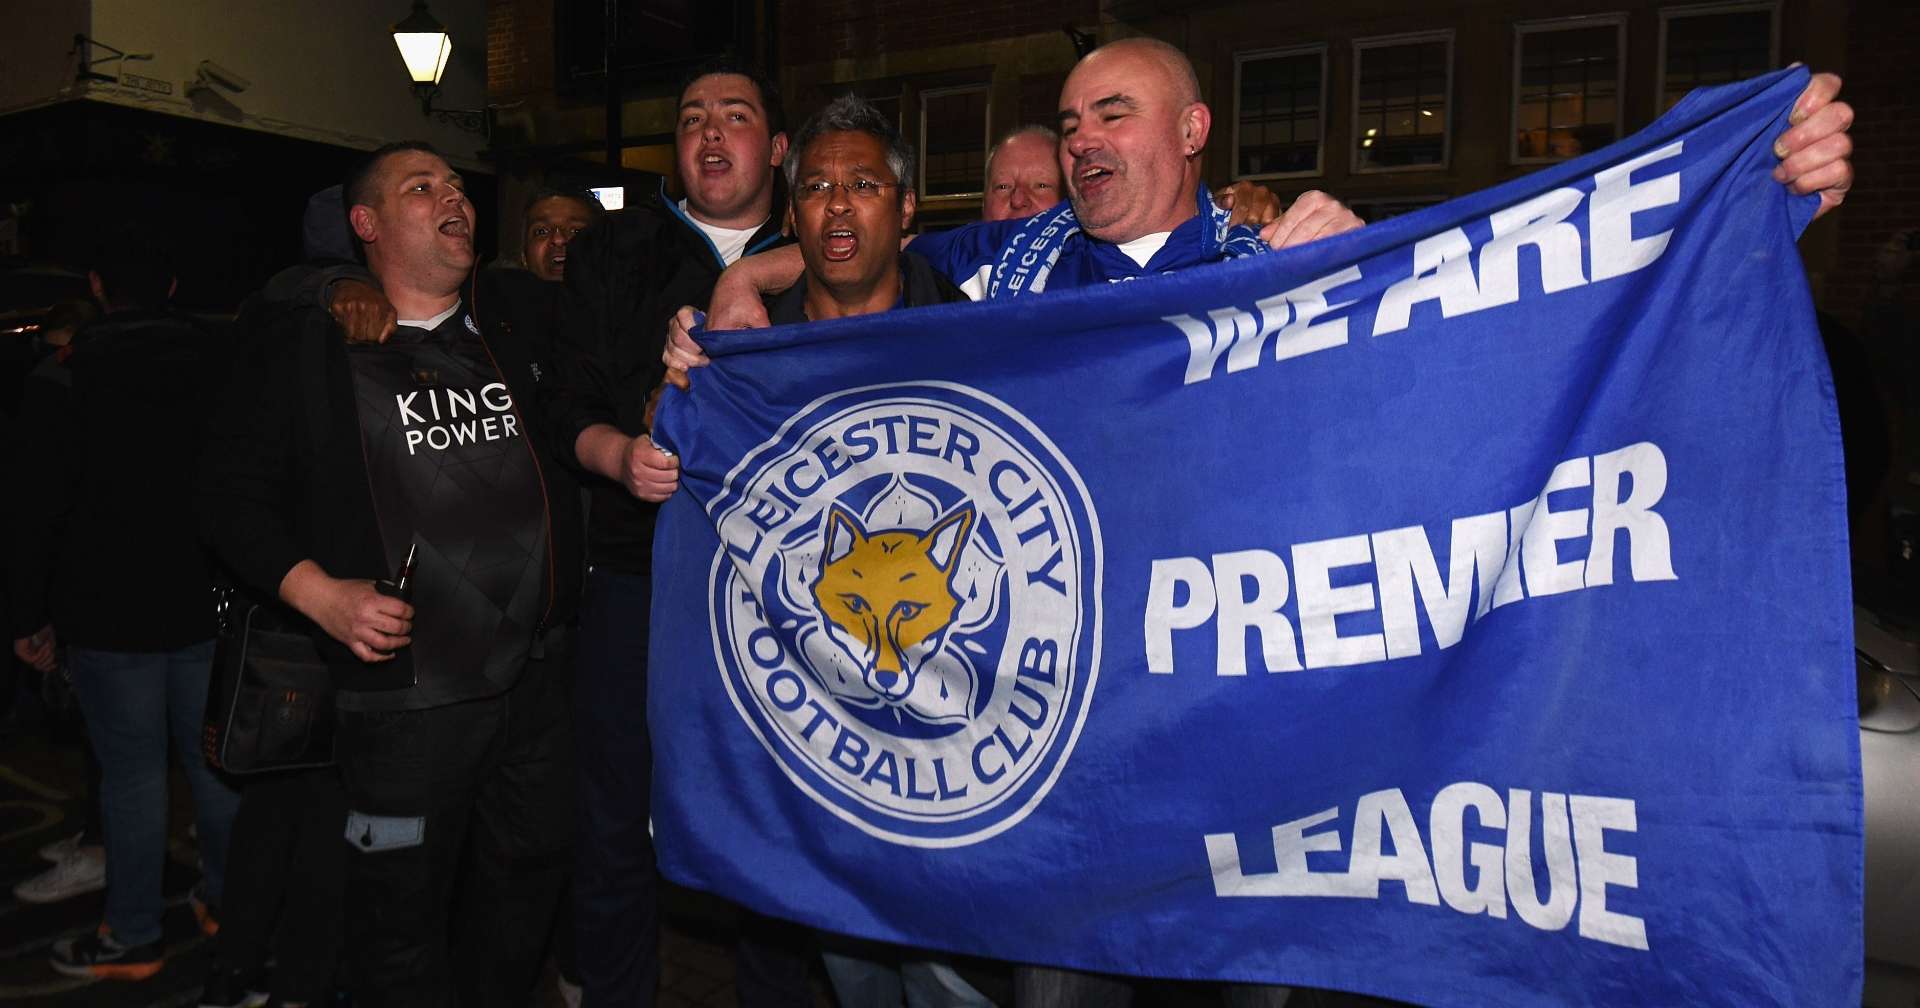 Leicester City are crowned Premier League champions